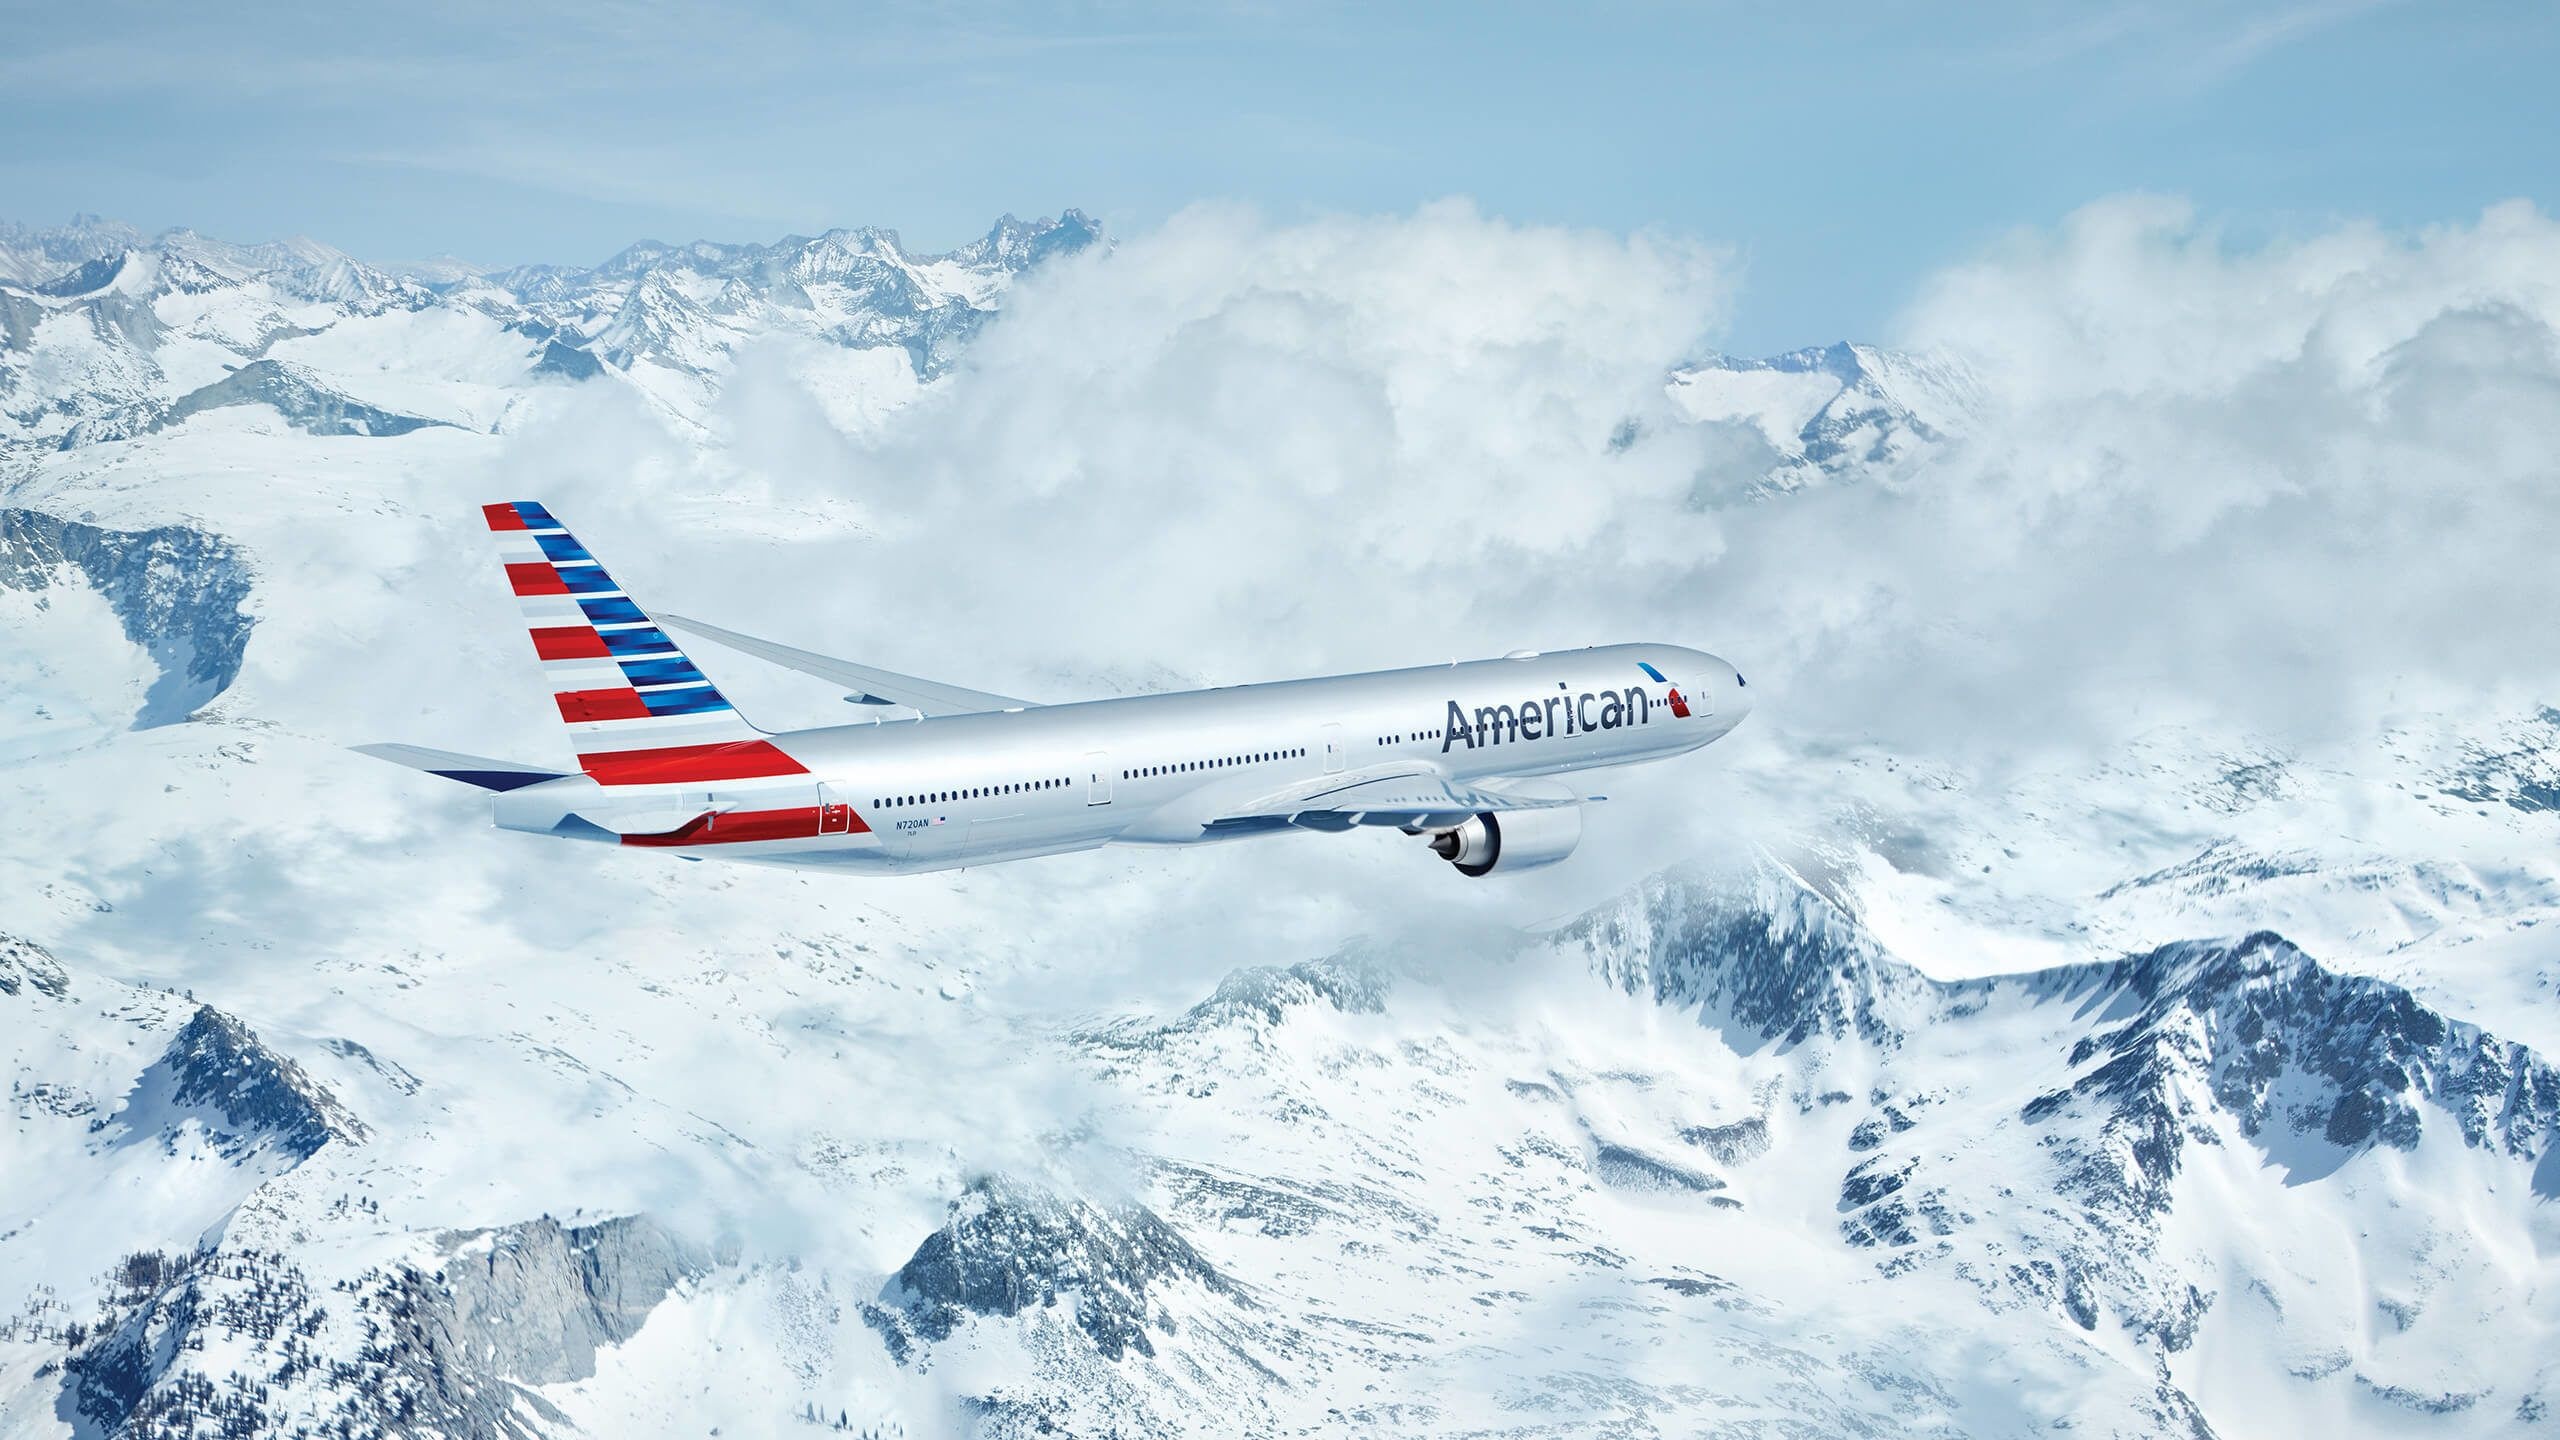 American Airlines, Top free backgrounds, Airline wallpapers, Travel theme, 2560x1440 HD Desktop